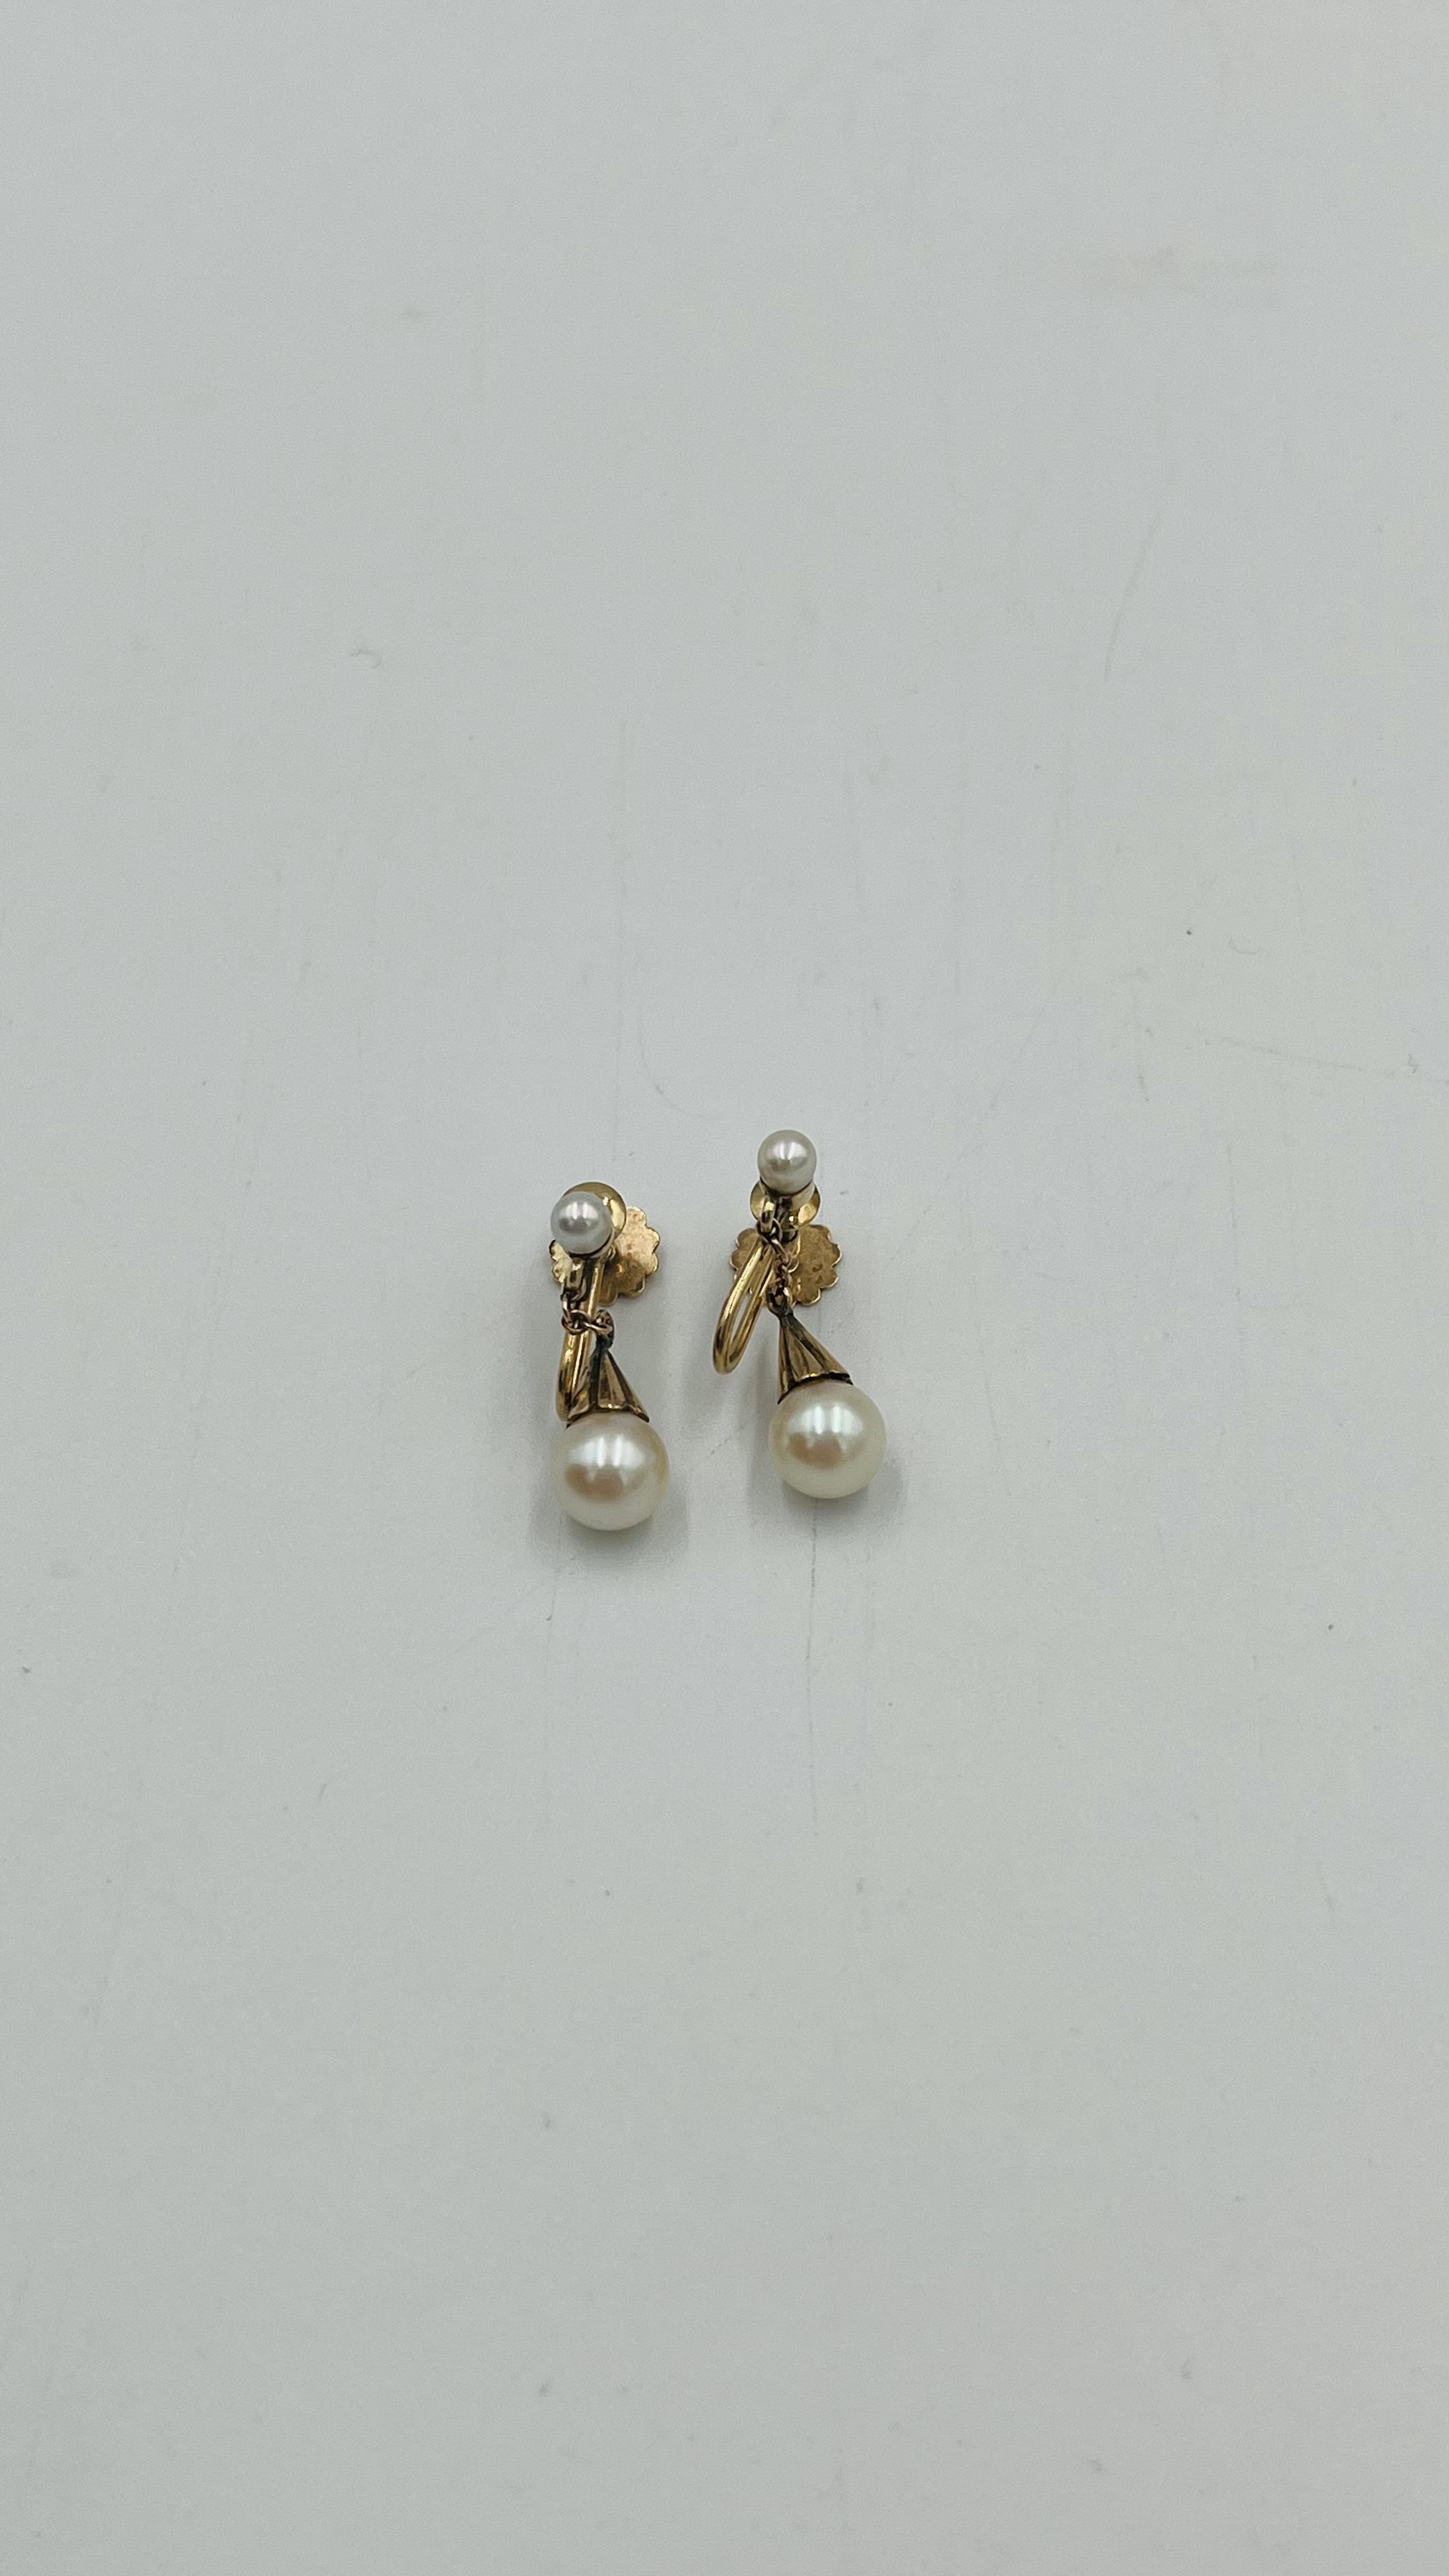 Pair of 9ct gold earrings with pearl drops - Image 2 of 3